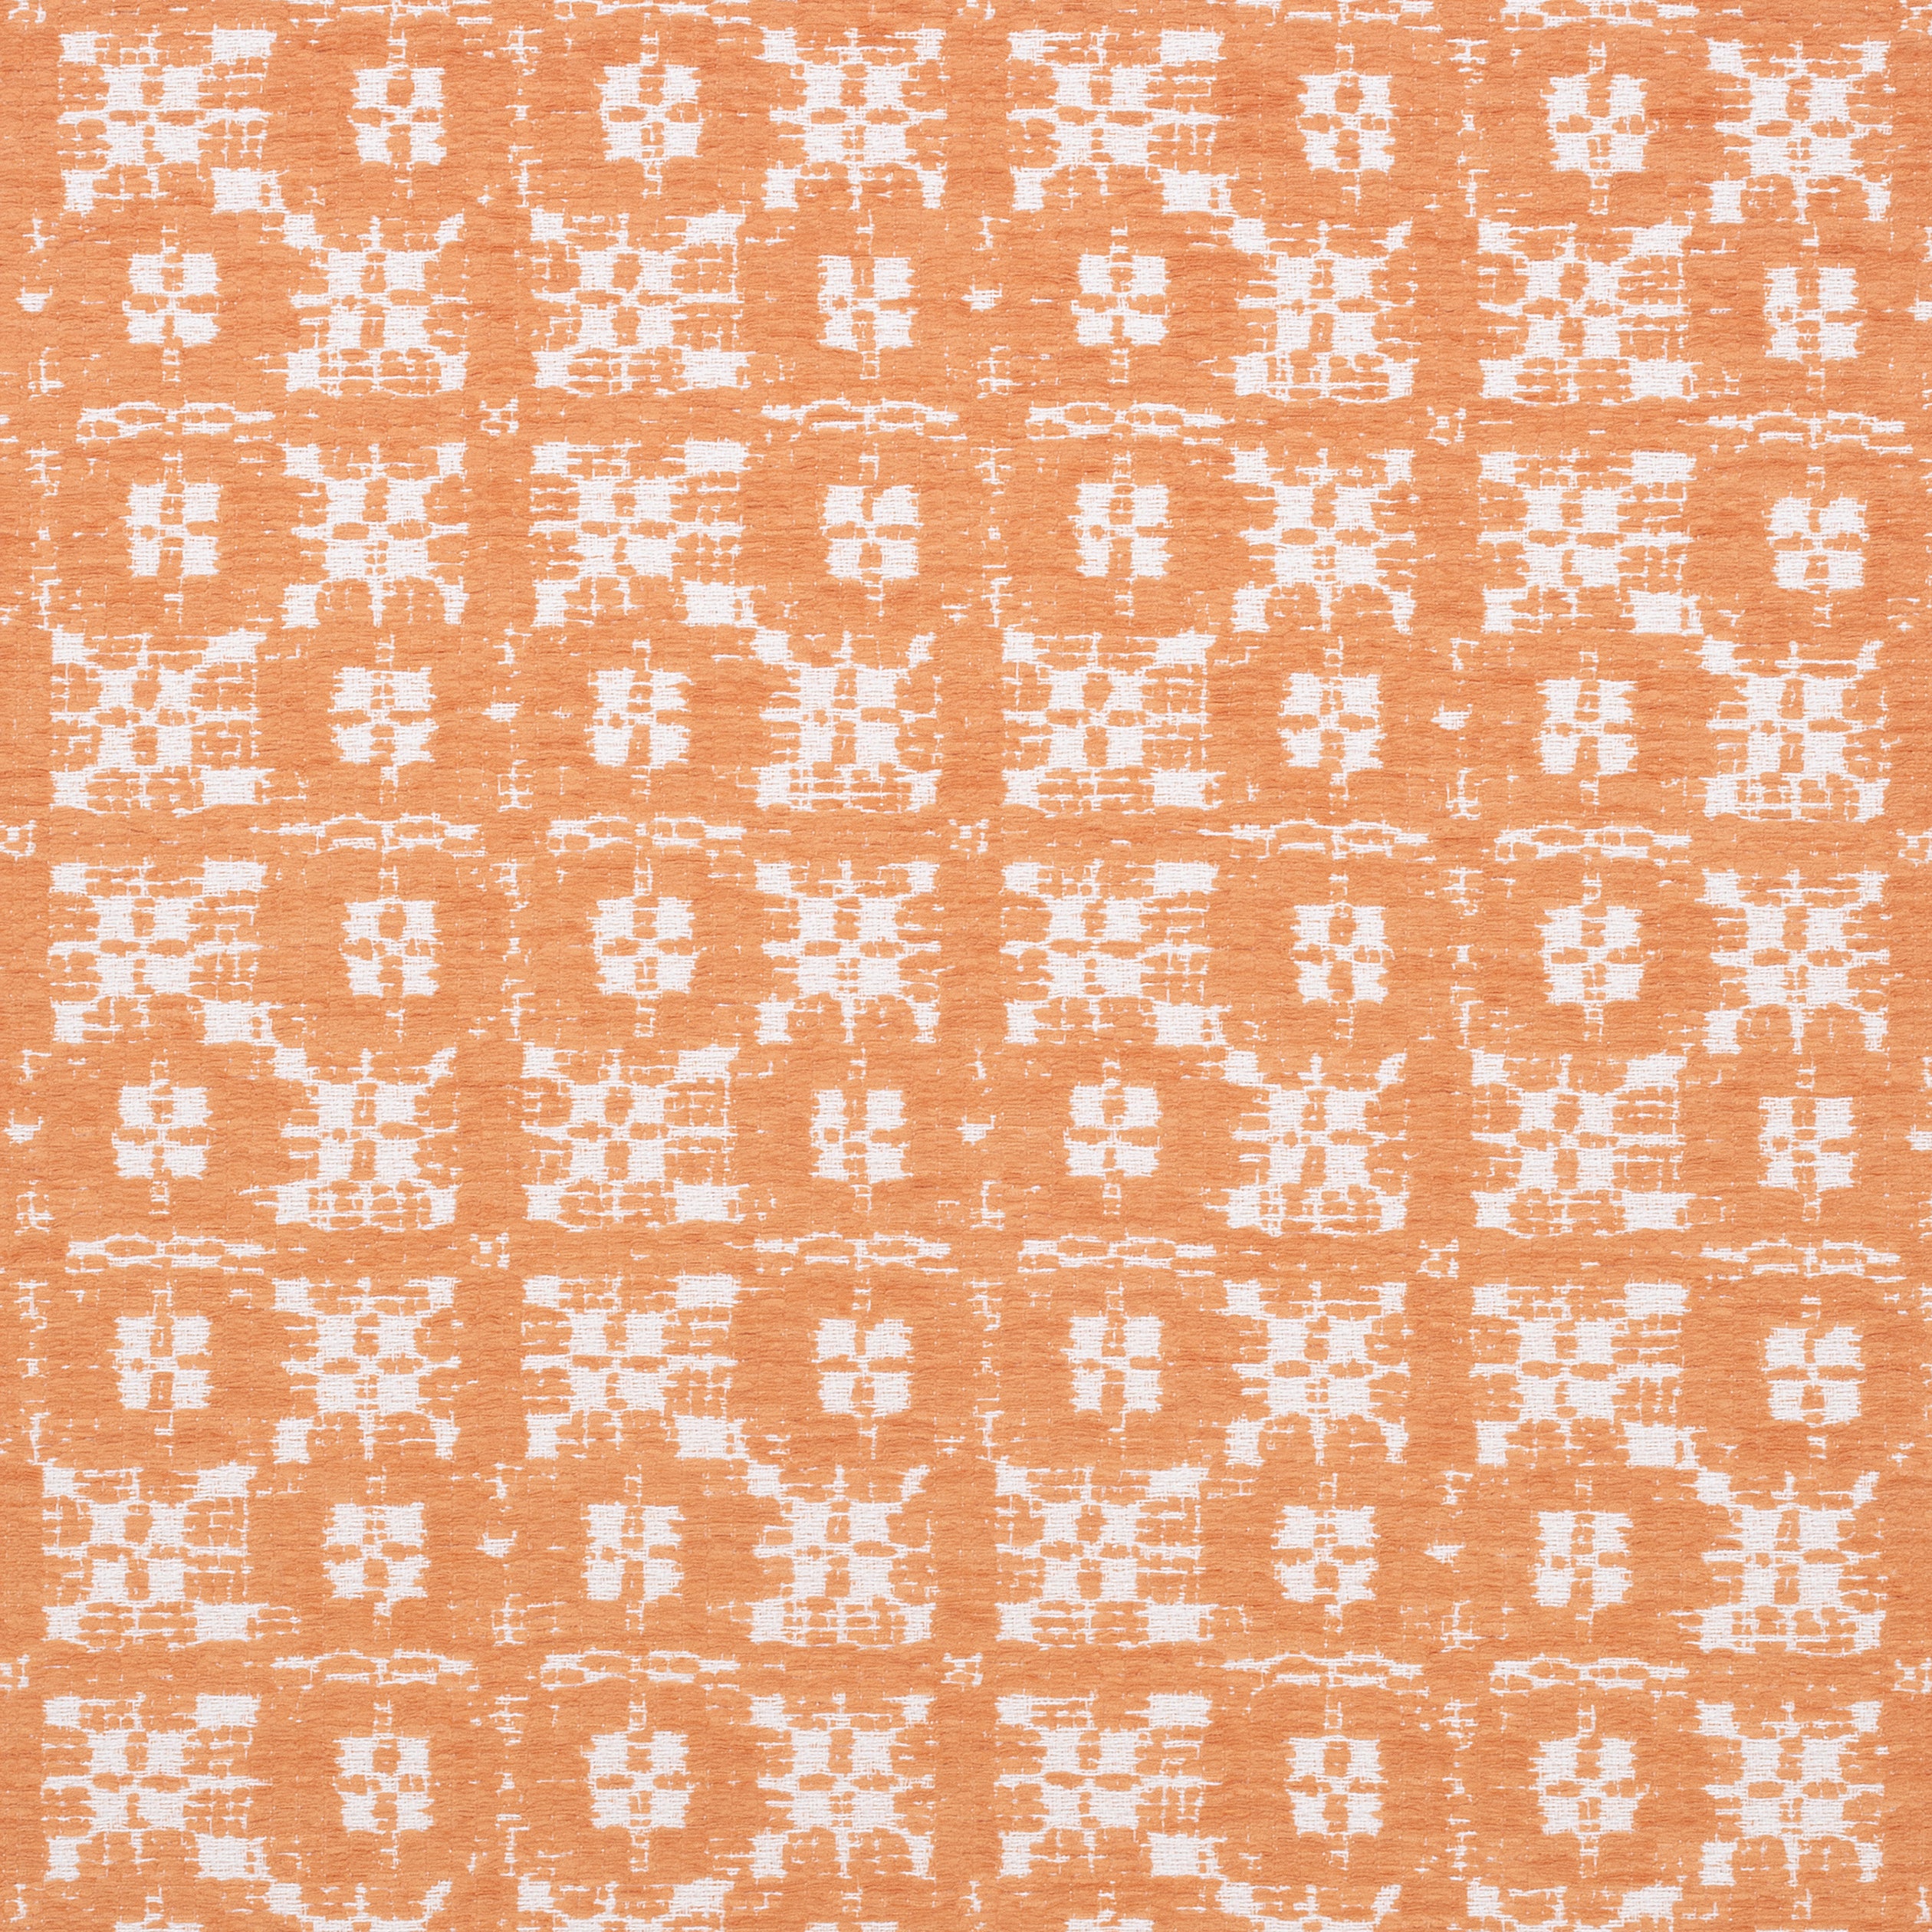 Brimfield fabric in melon color - pattern number W73499 - by Thibaut in the Landmark collection